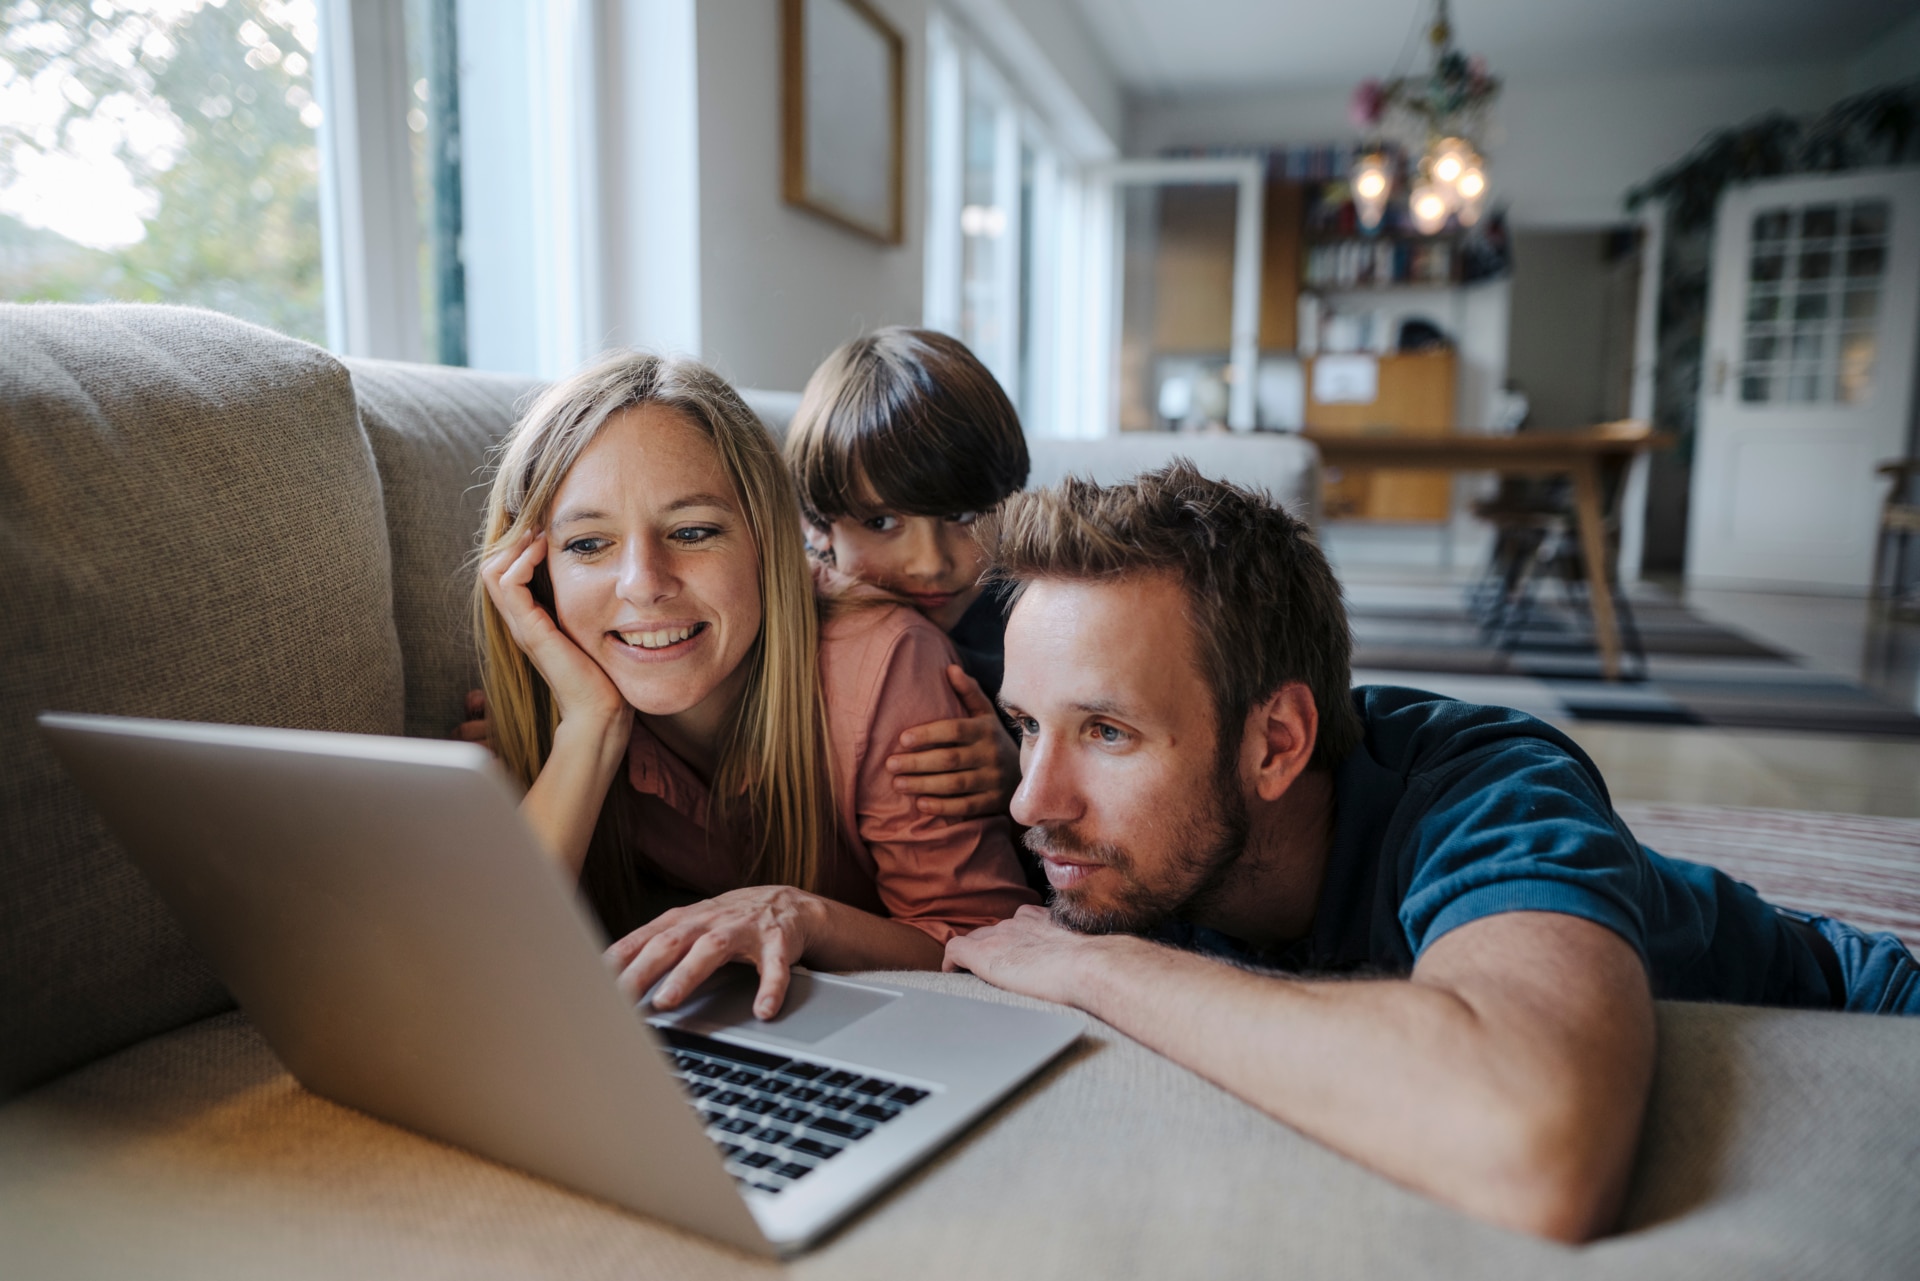 Couple in their 30s with their son in front of a laptop - domestic scene.